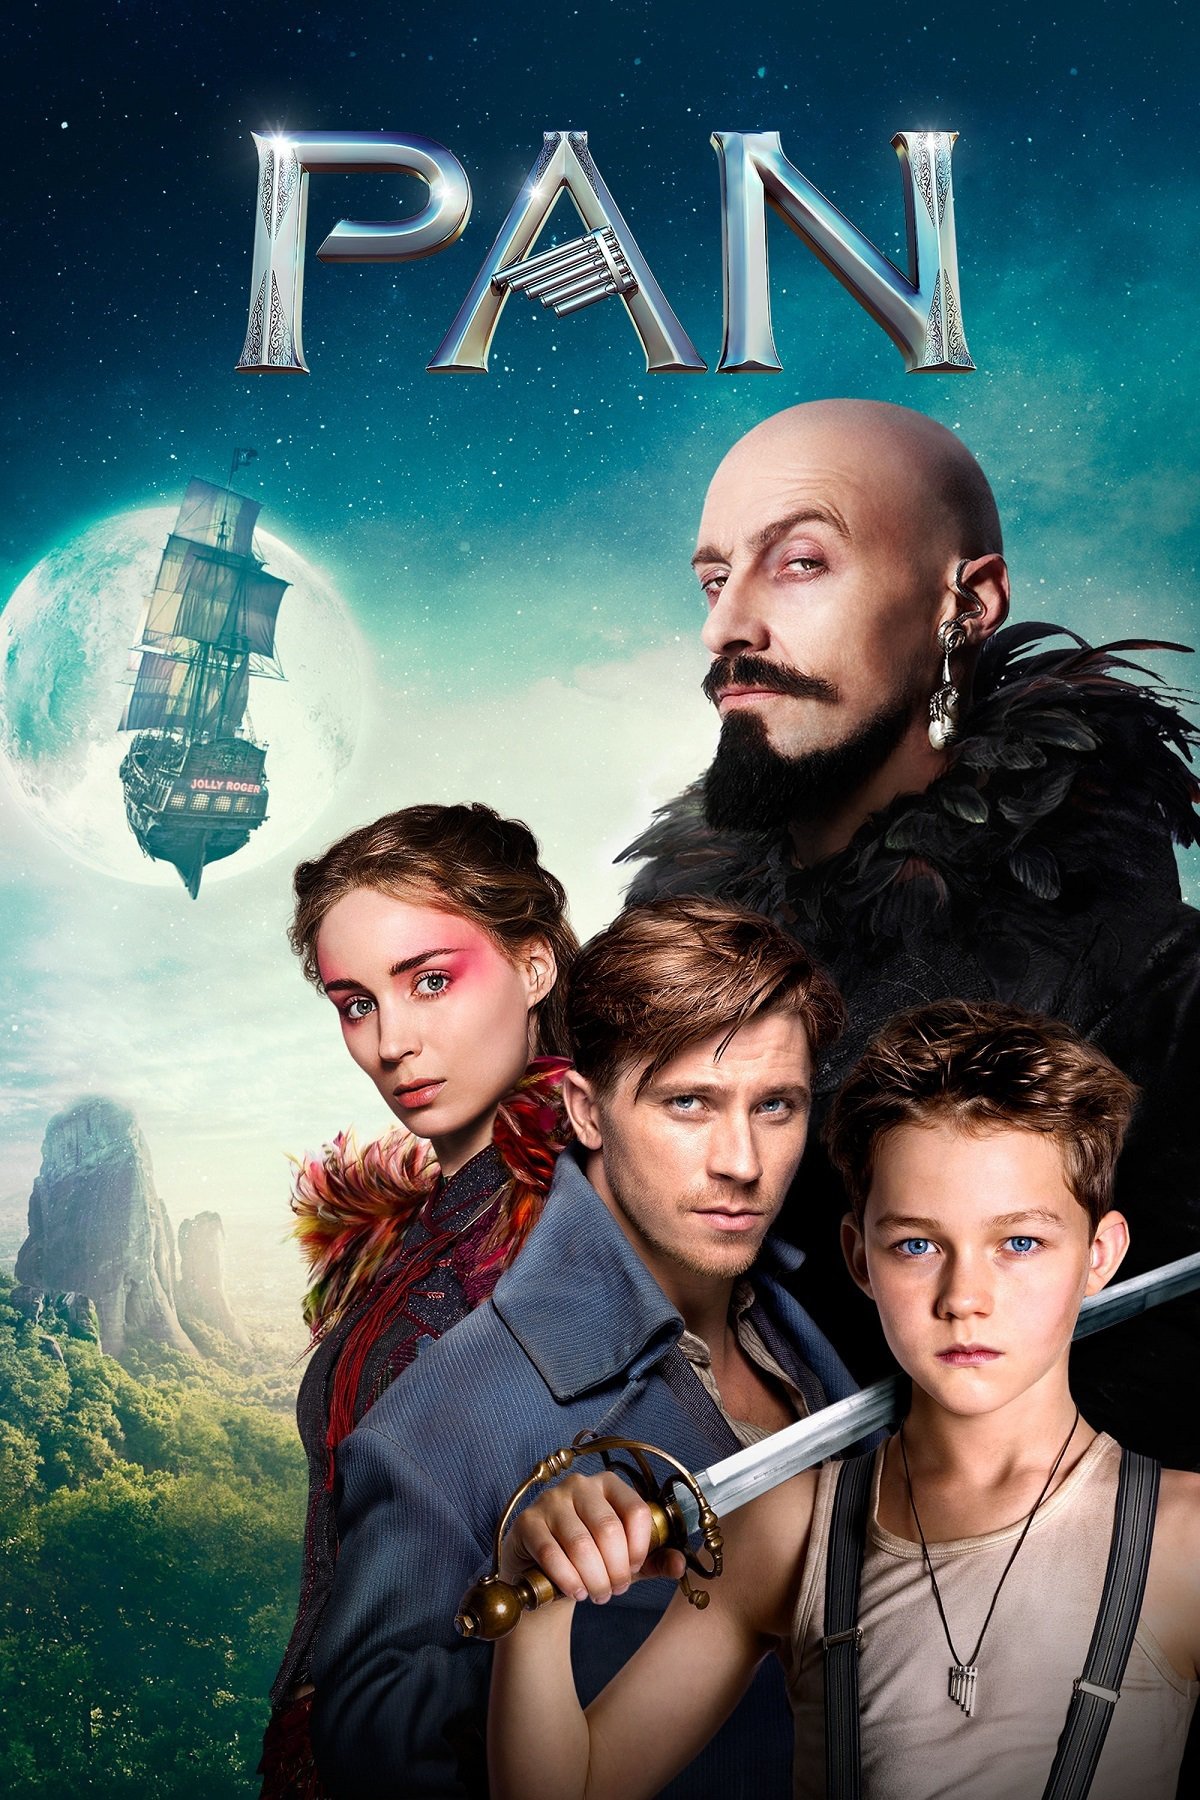 Poster for the movie "Pan"